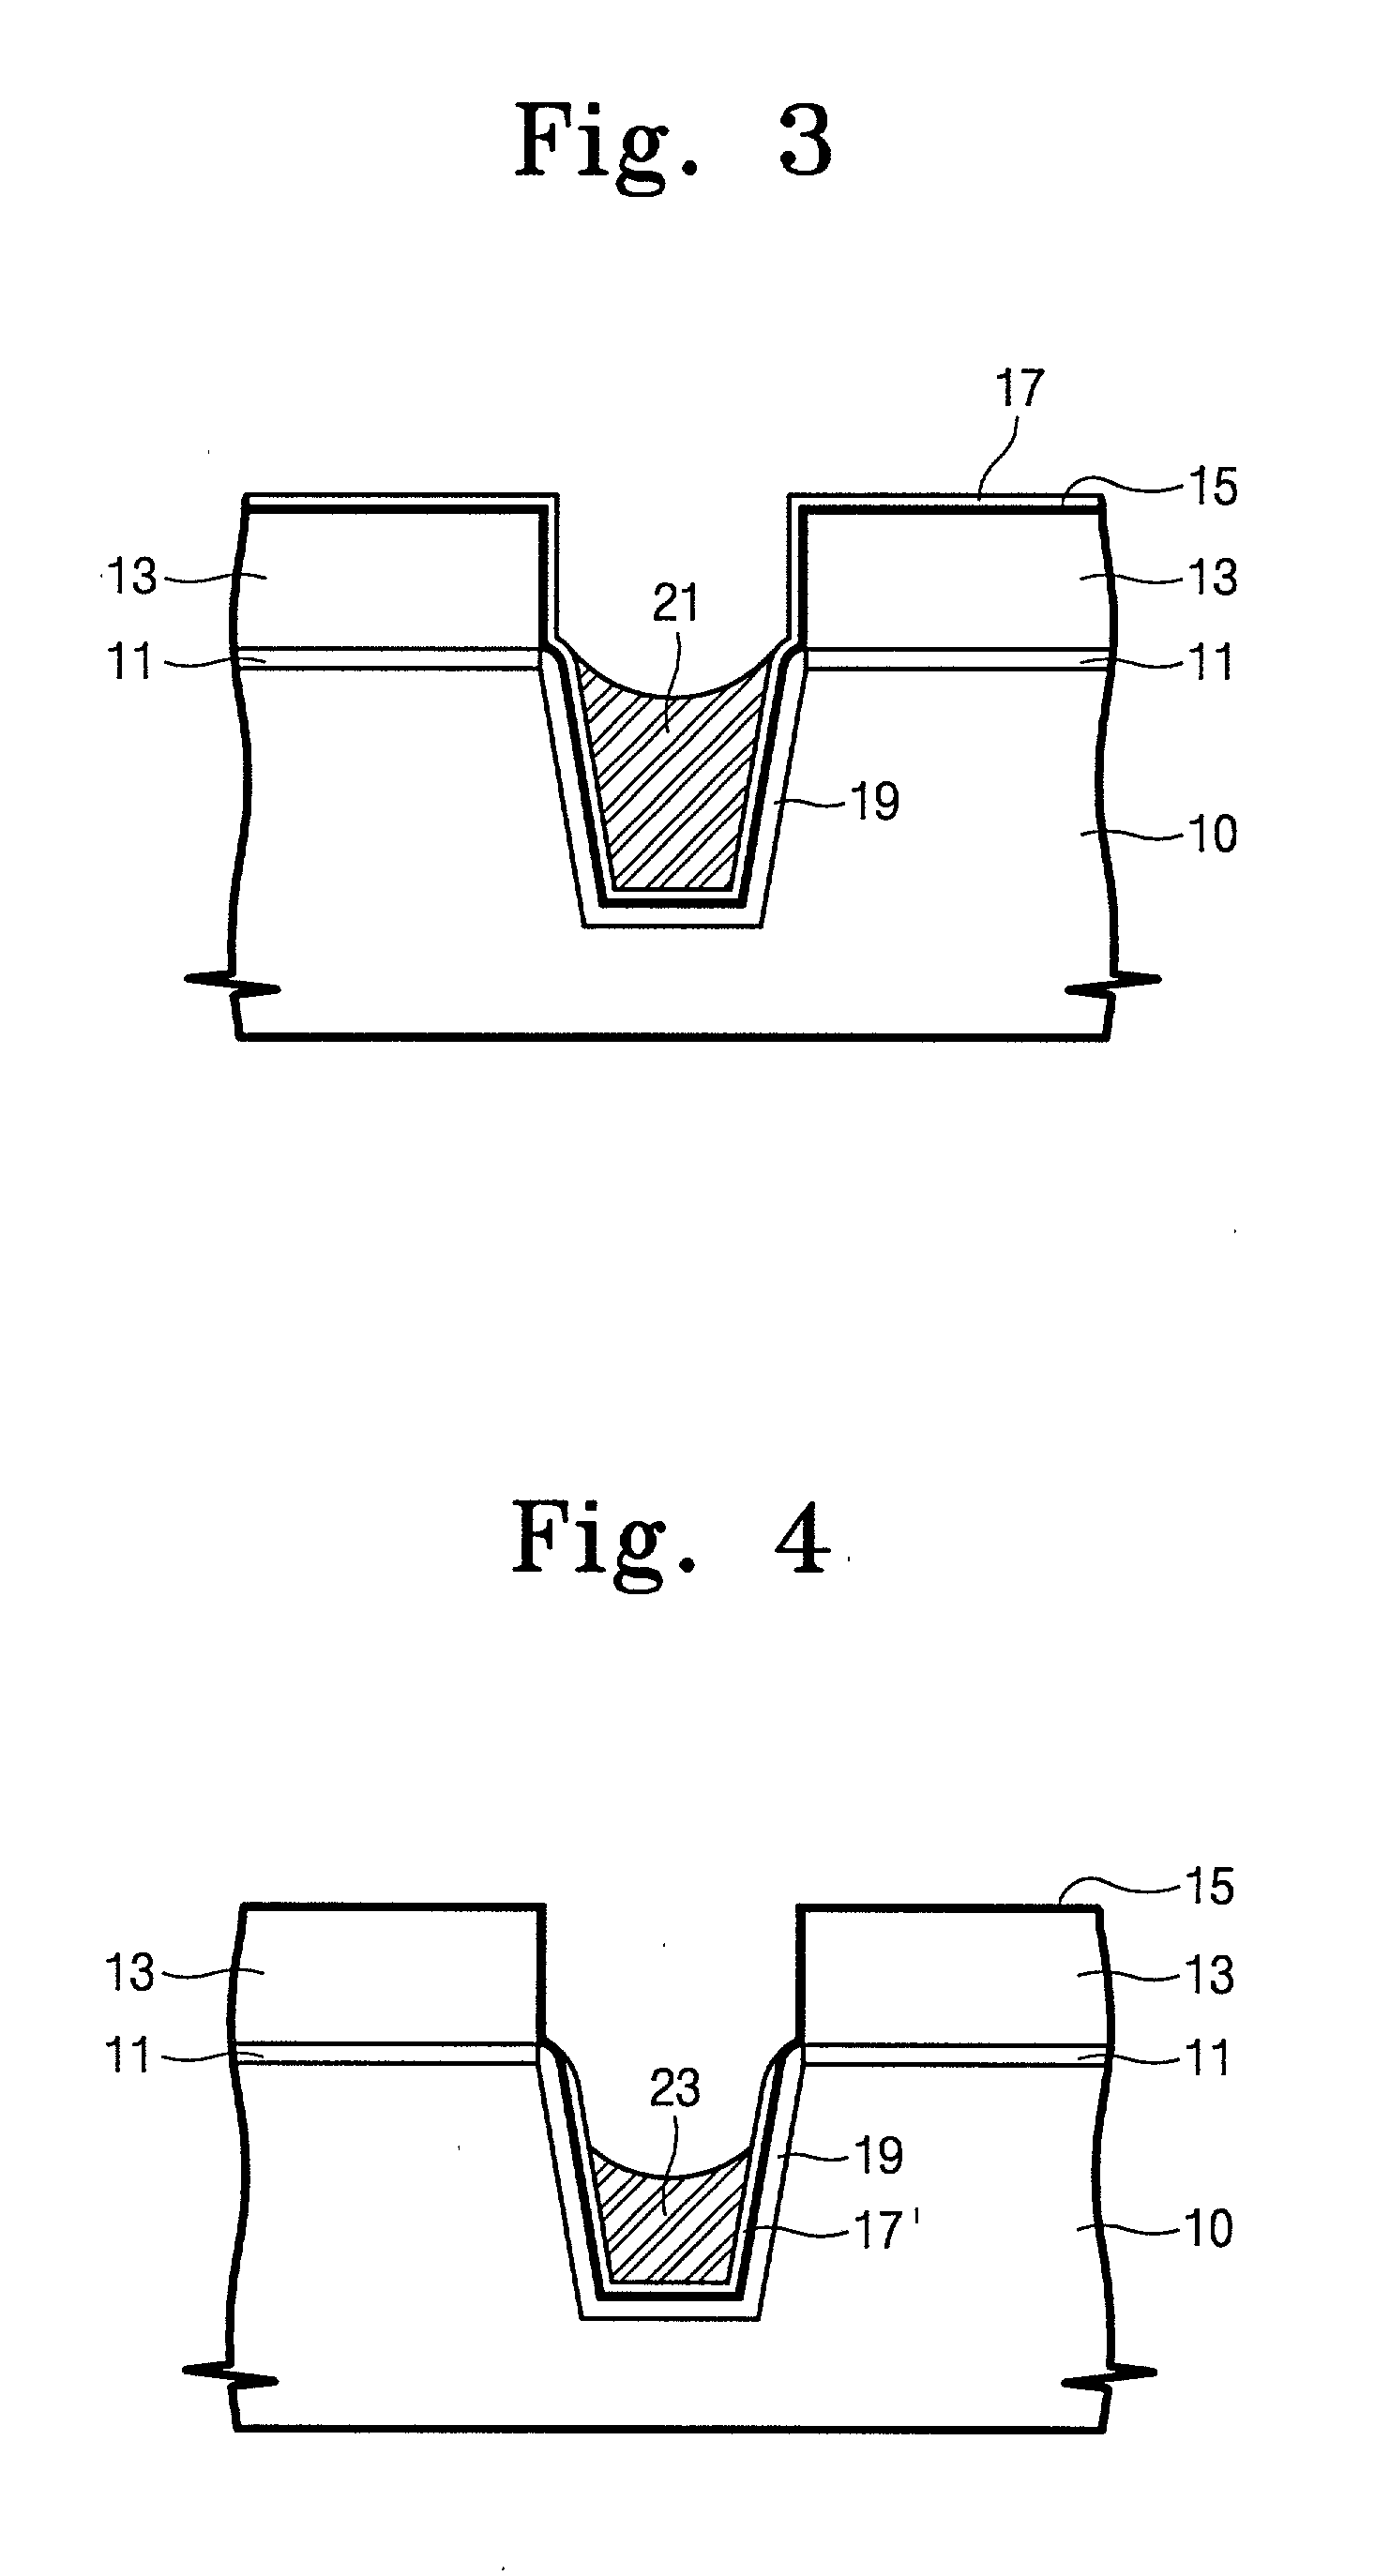 Semiconductor device having trench isolation layer and a method of forming the same